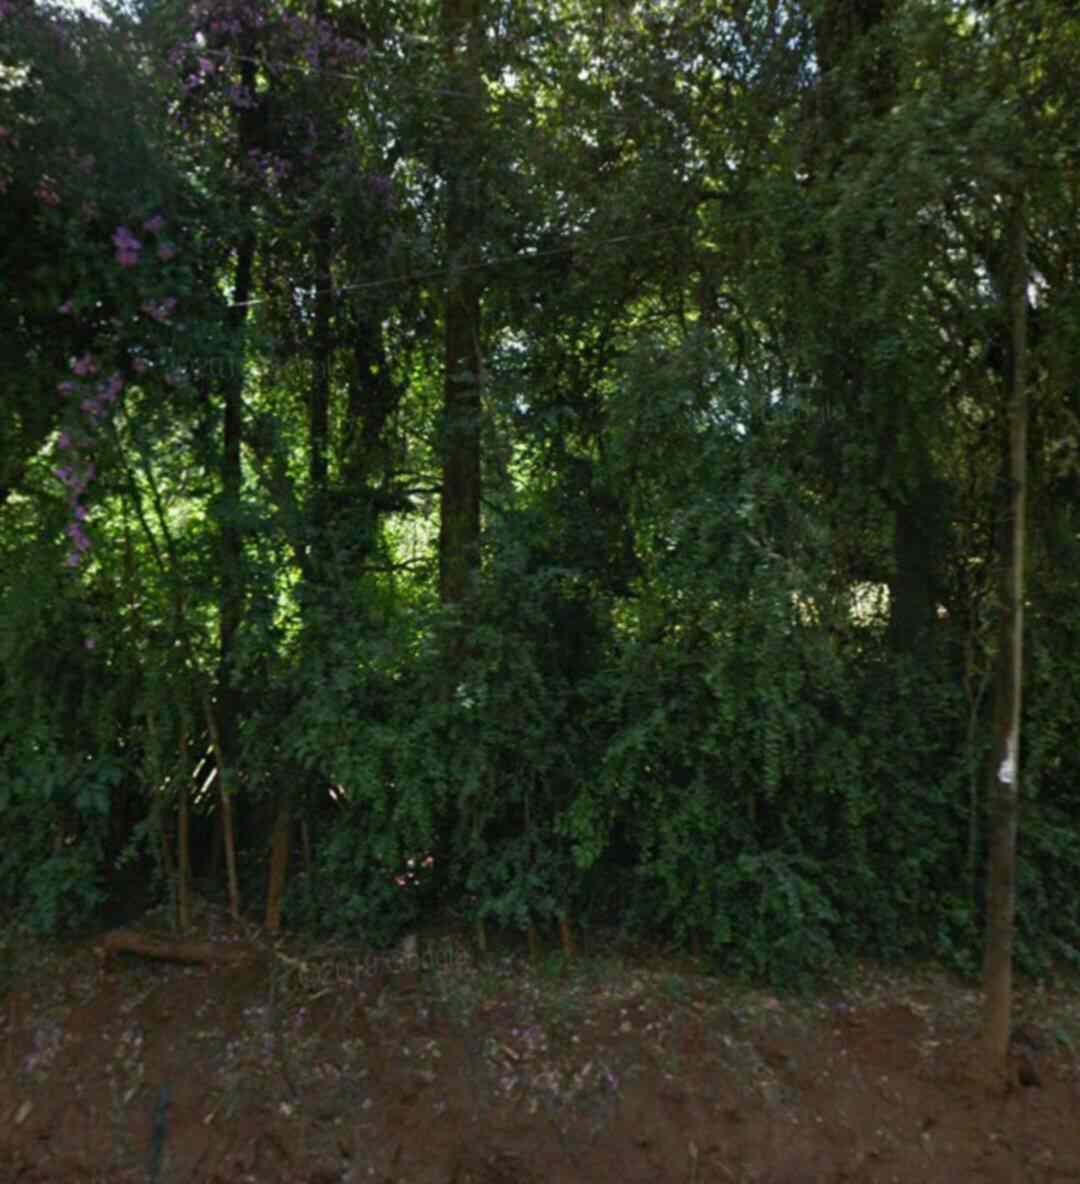 3/4 Actre of Land for sale in Ngara along ngara road